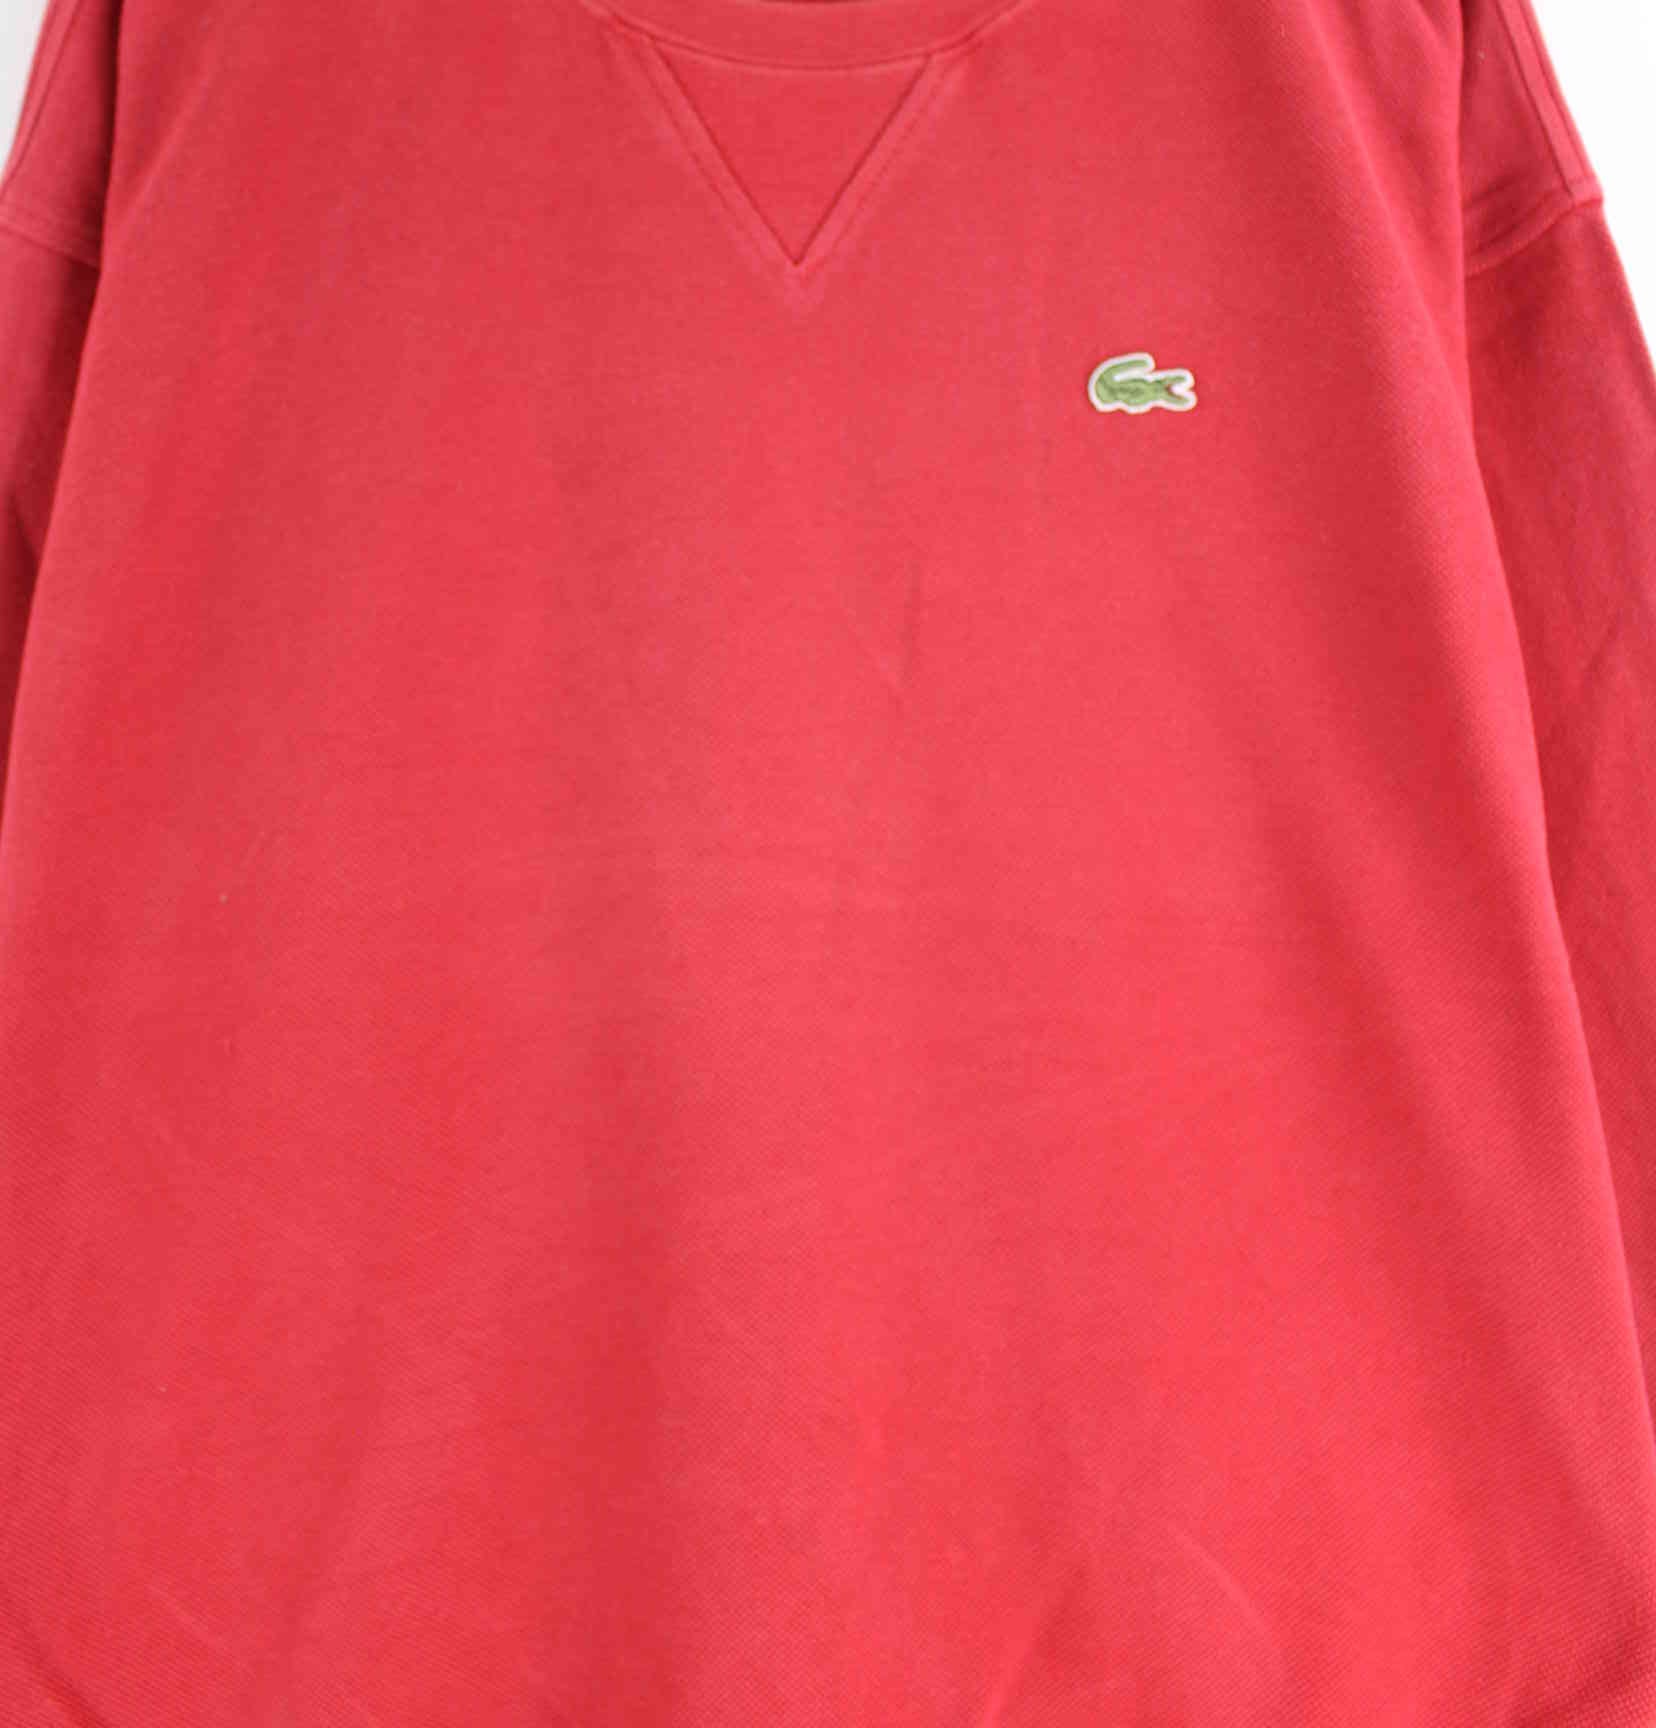 Lacoste 90s Vintage Sweater Rot L (detail image 1)